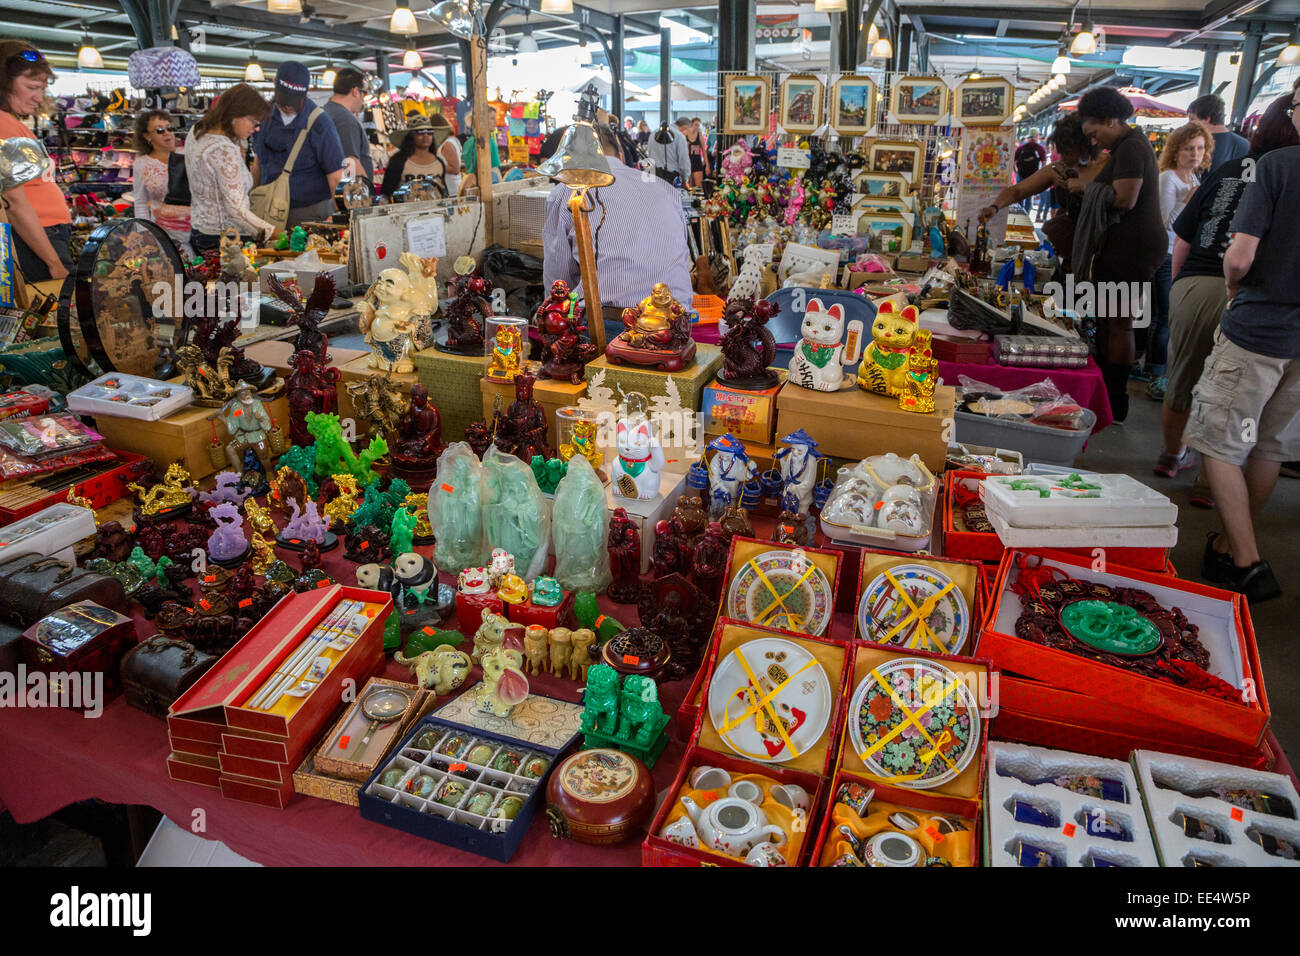 French Quarter, New Orleans, Louisiana. Curios, Gifts, and Souvenirs Stock Photo: 77554226 - Alamy